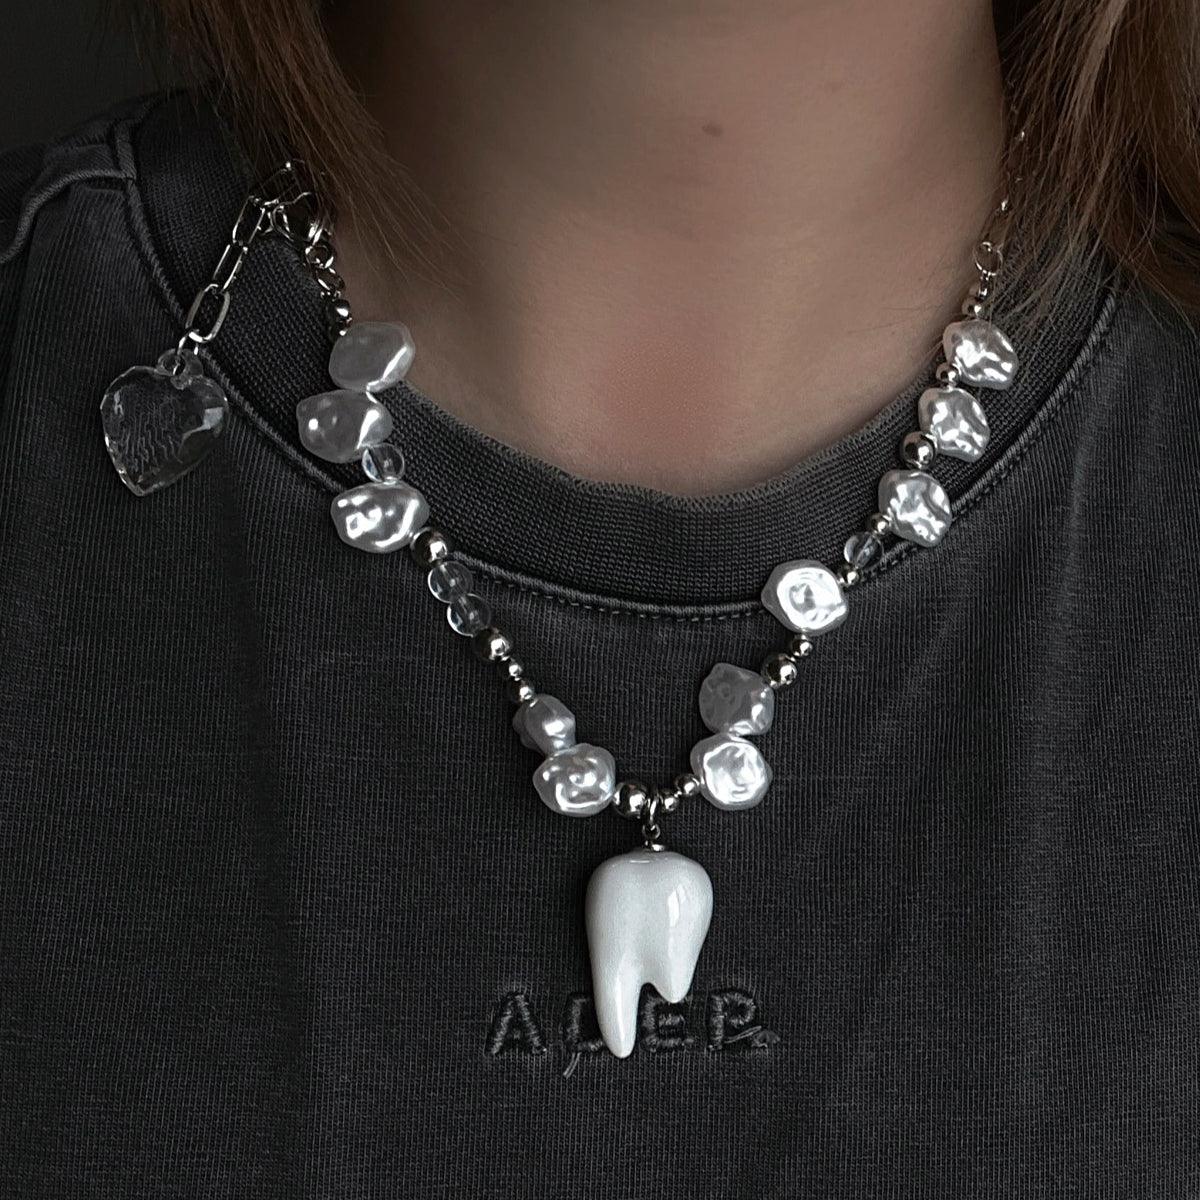 Large Porcelain Tooth Aesthetic Necklace - Aesthetic Clothes Shop